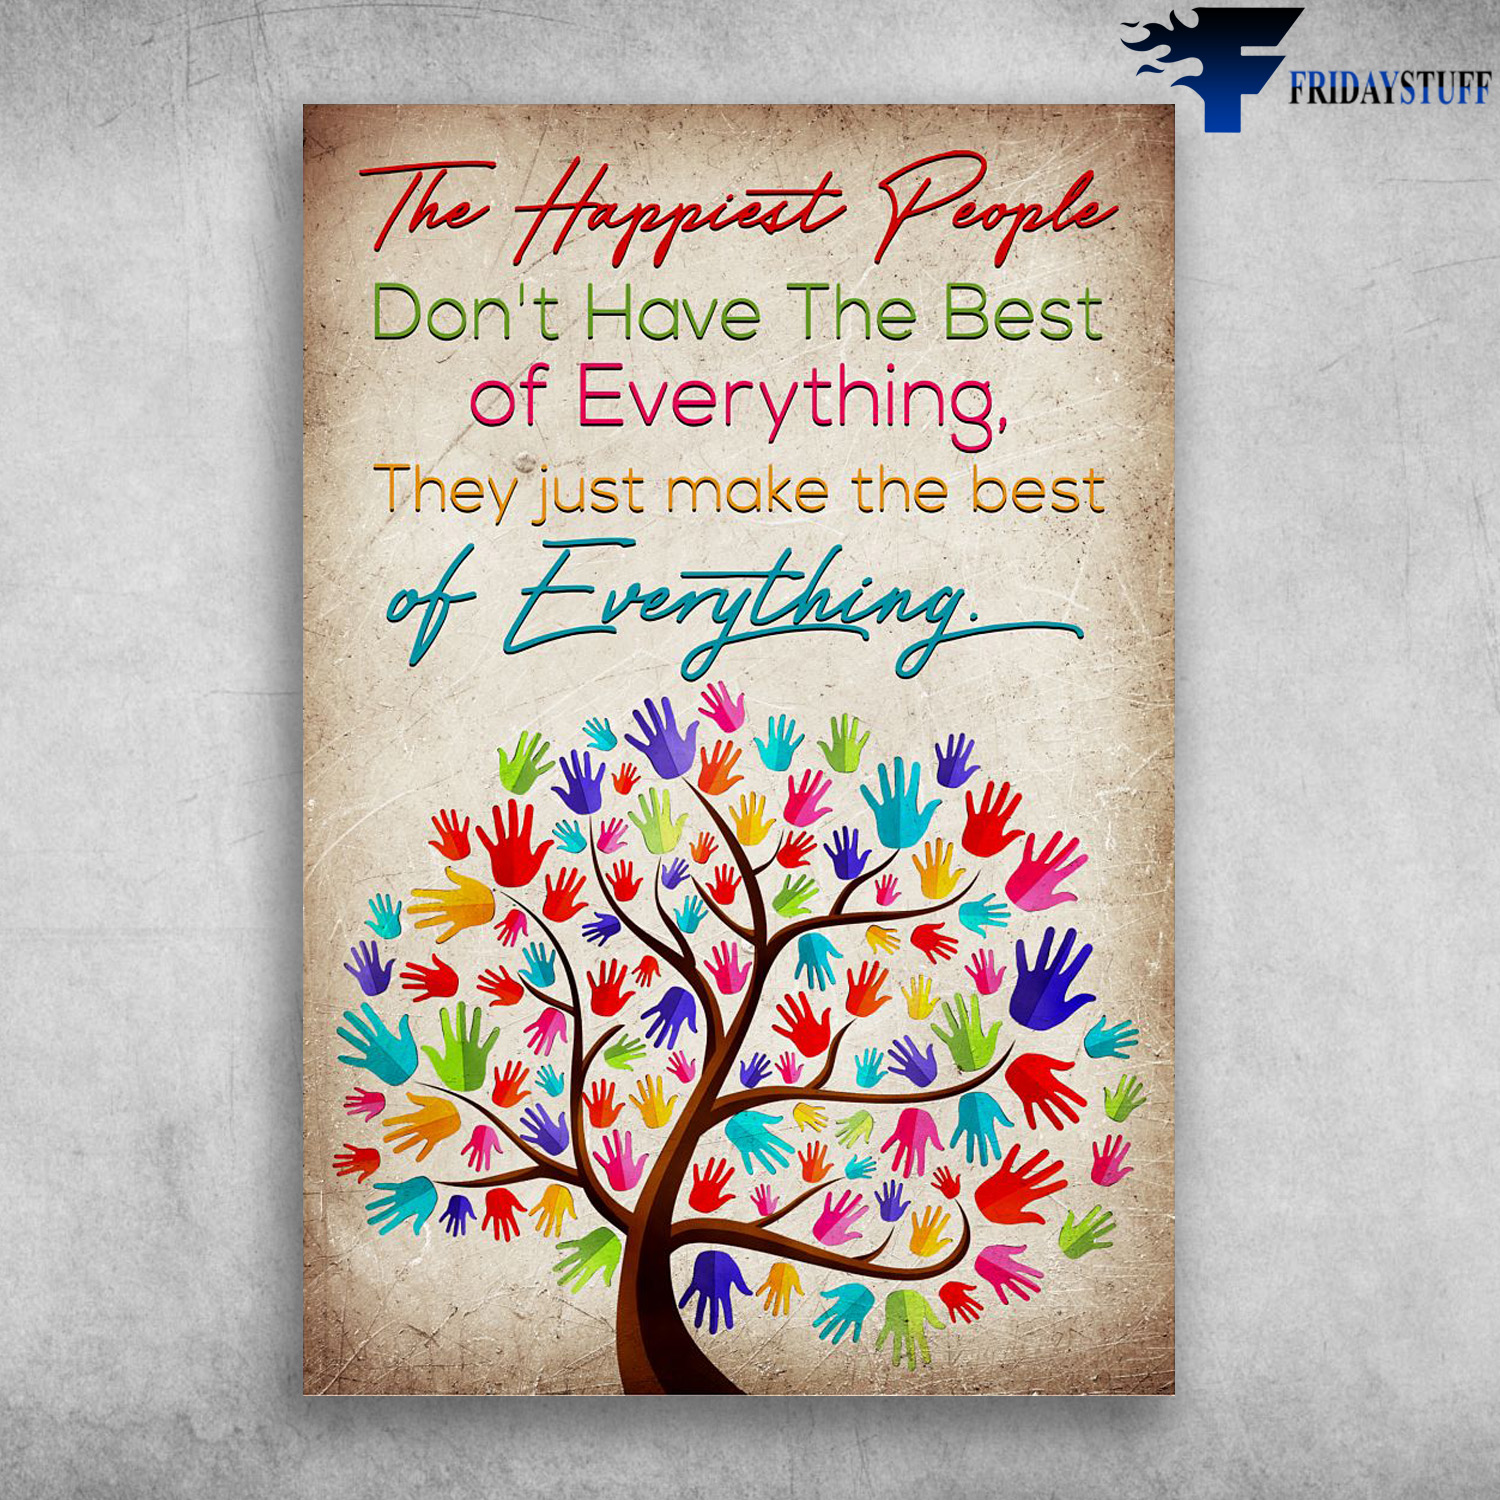 Social Worker - The Happiest People, Don't Have The Best Of Everything, They Just Make The Best Of Everything, Hands Tree